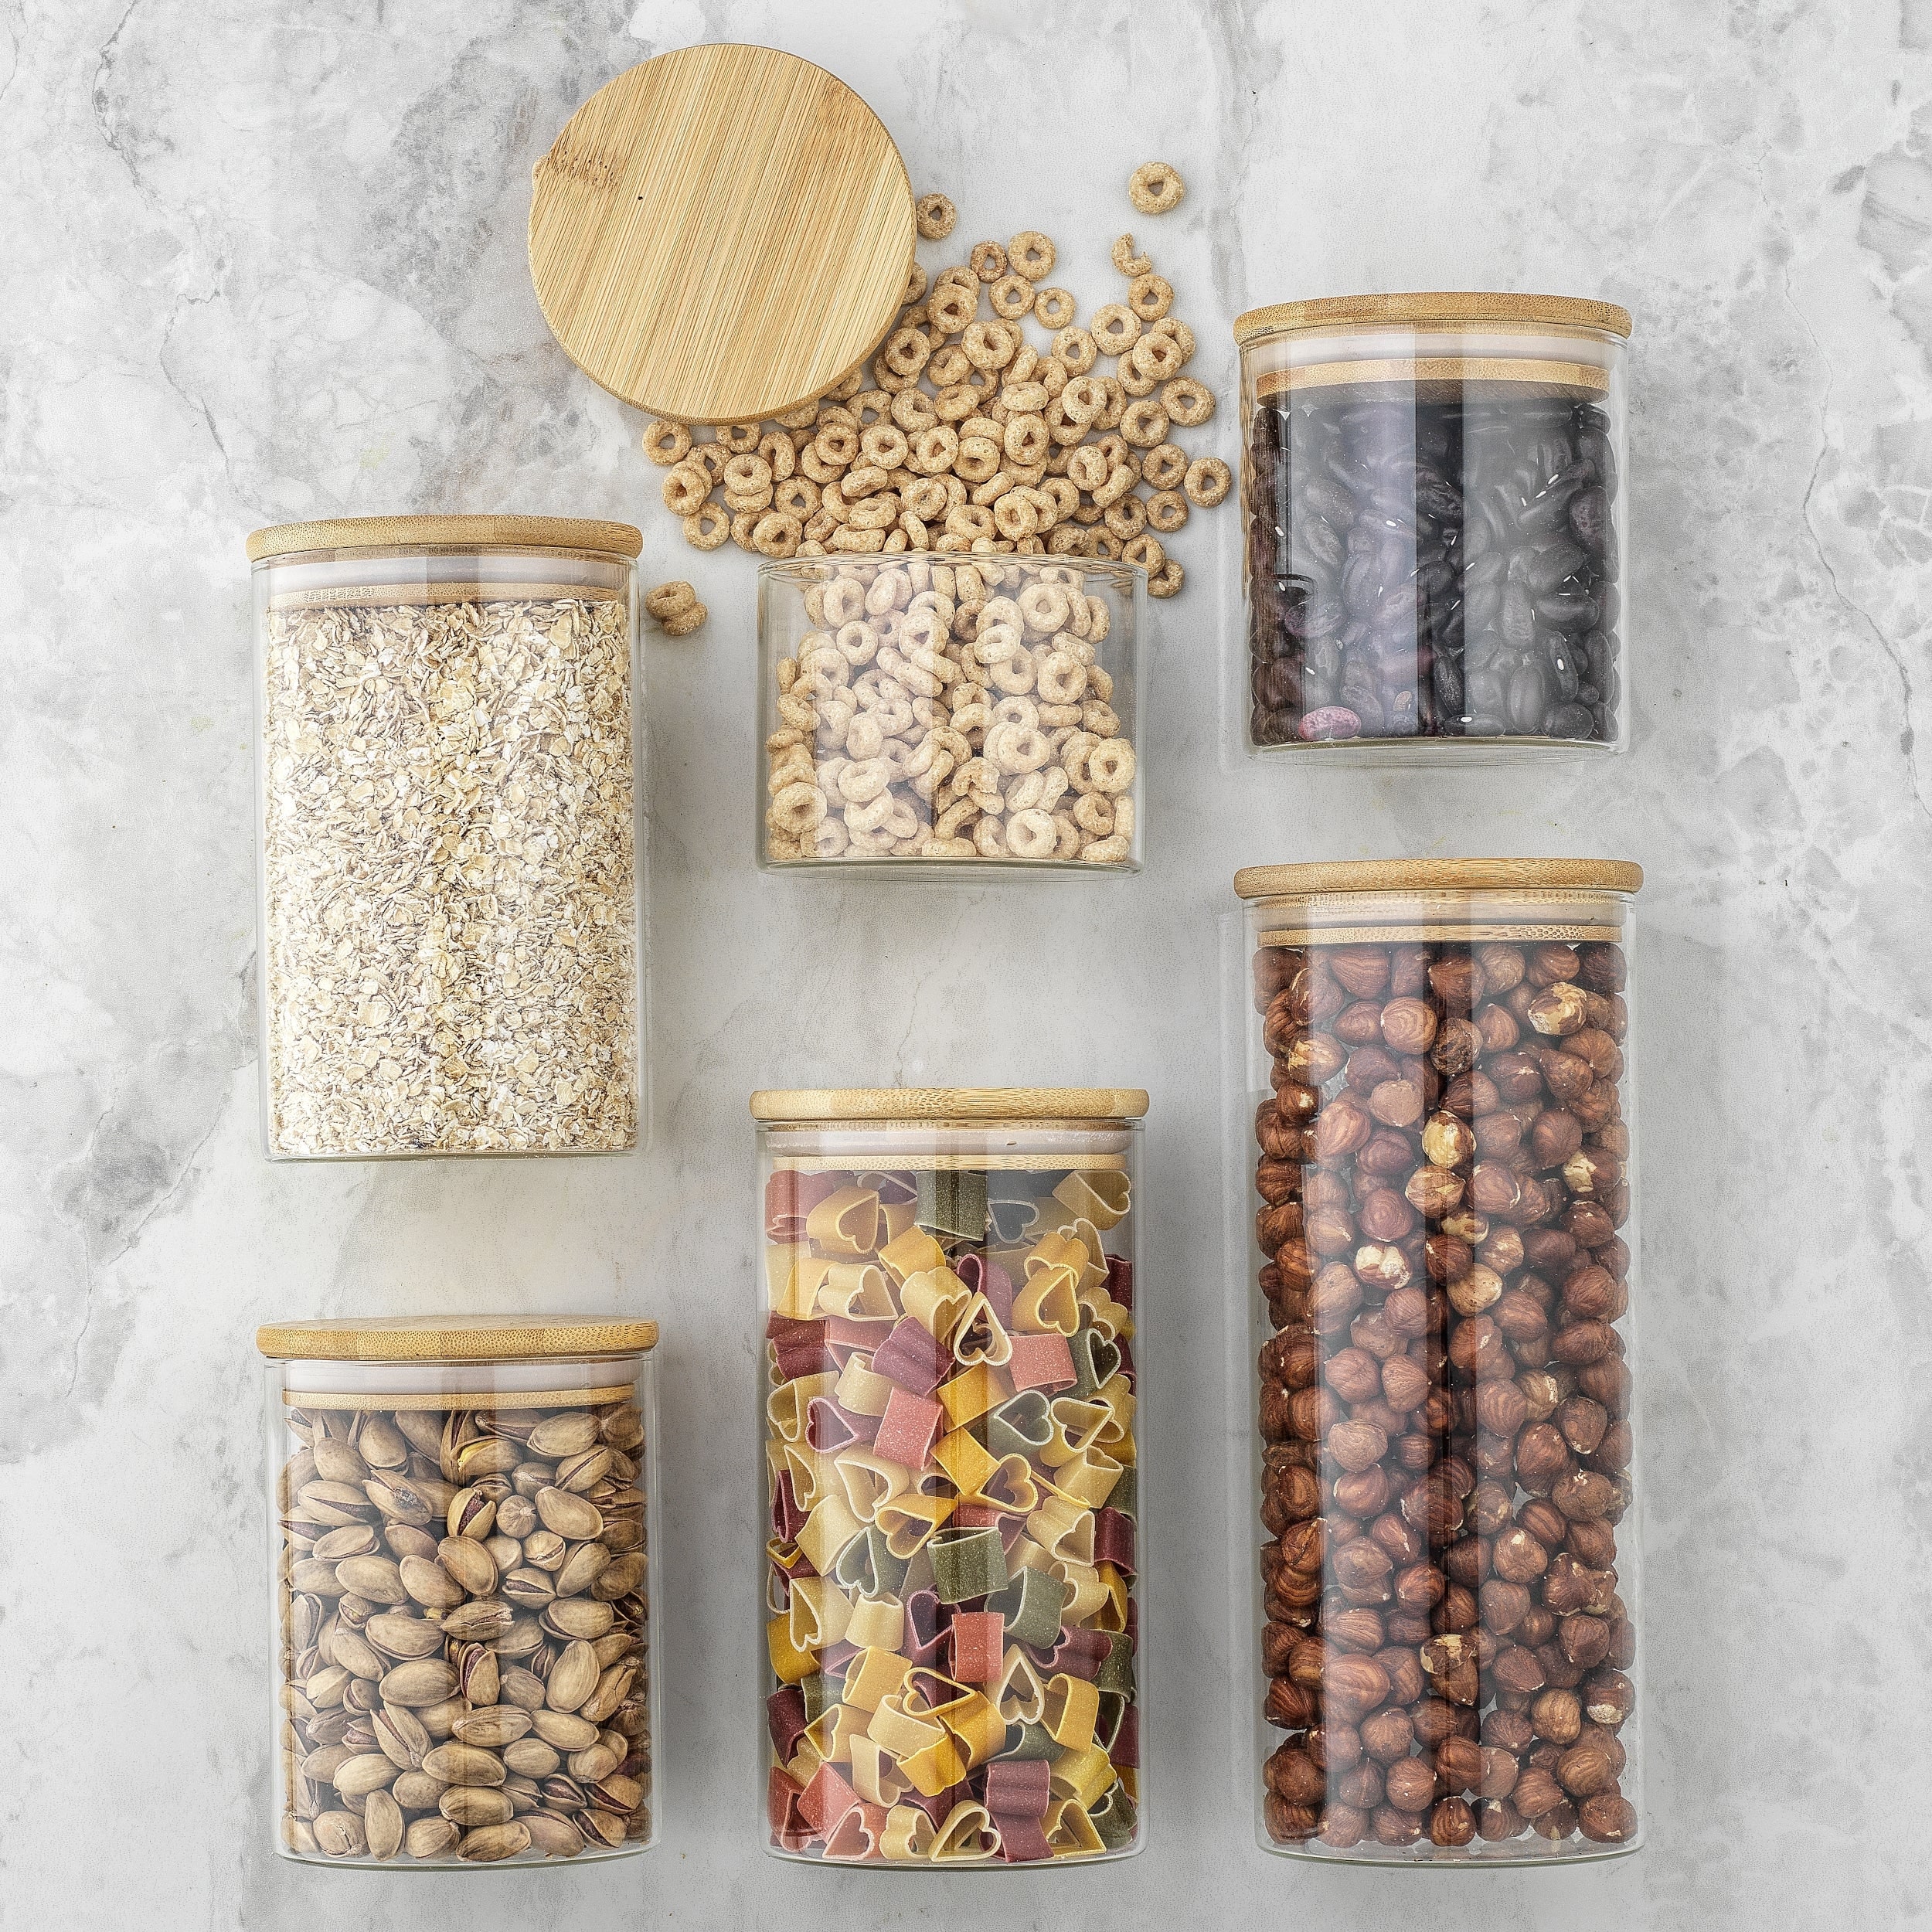 https://ak1.ostkcdn.com/images/products/is/images/direct/9278dab8dad1f9349680e3f6a3a8644c3f0eecb9/JoyJolt-Kitchen-Storage-Jars-with-Airtight-Bamboo-Clamp-Lids-Set-of-6.jpg